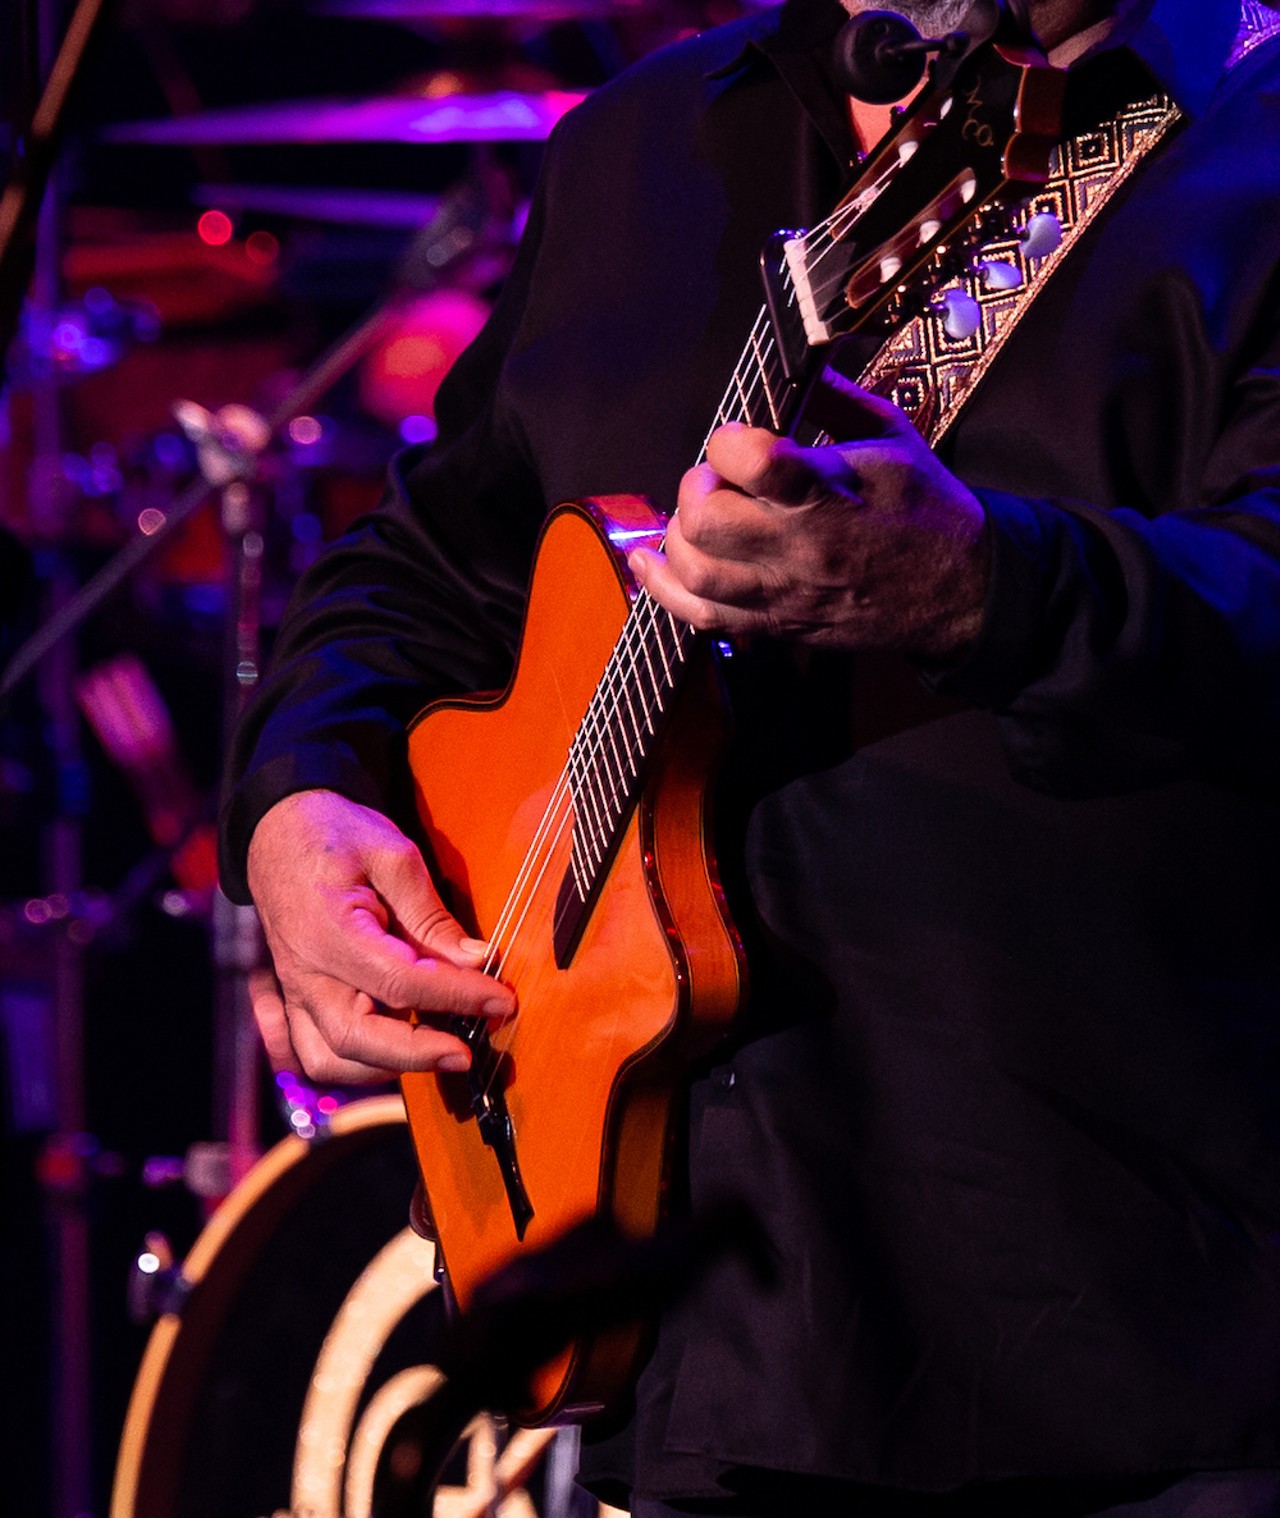 Photos of Latin music favorite Gipsy Kings at Ruth Eckerd Hall in Clearwater